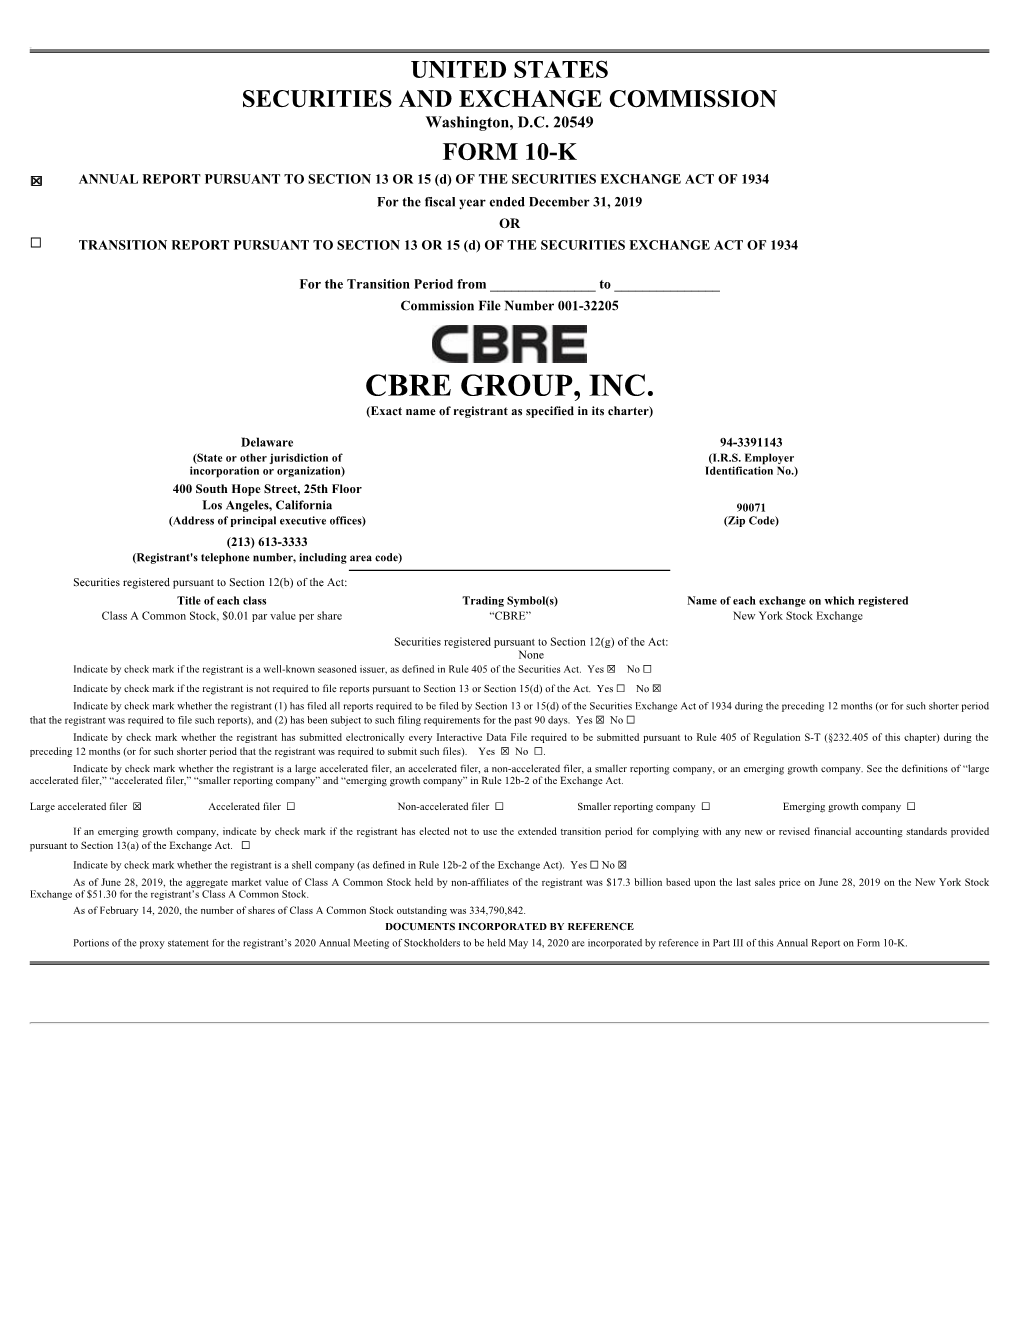 CBRE GROUP, INC. (Exact Name of Registrant As Specified in Its Charter)